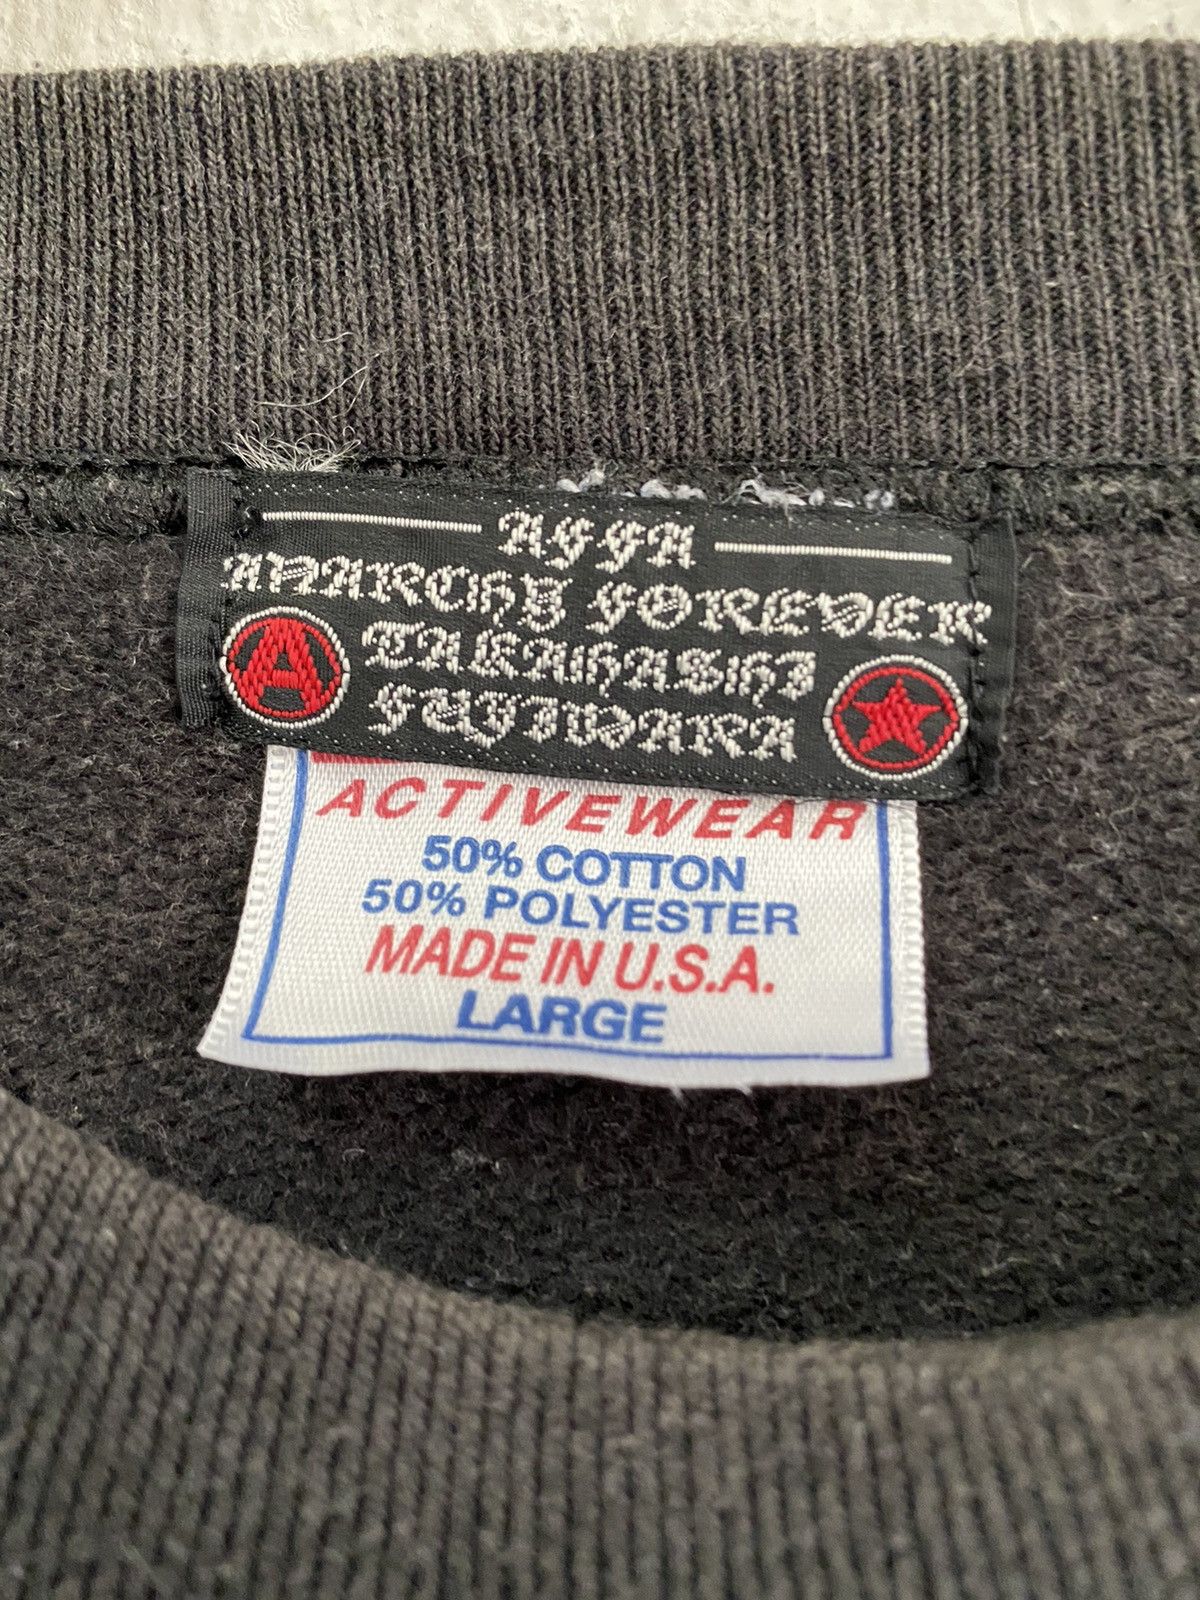 Undercover AFFA ANARCHY FOREVER FOREVER ANARCHY MADE IN USA SWEATSHIRT Size US S / EU 44-46 / 1 - 6 Thumbnail